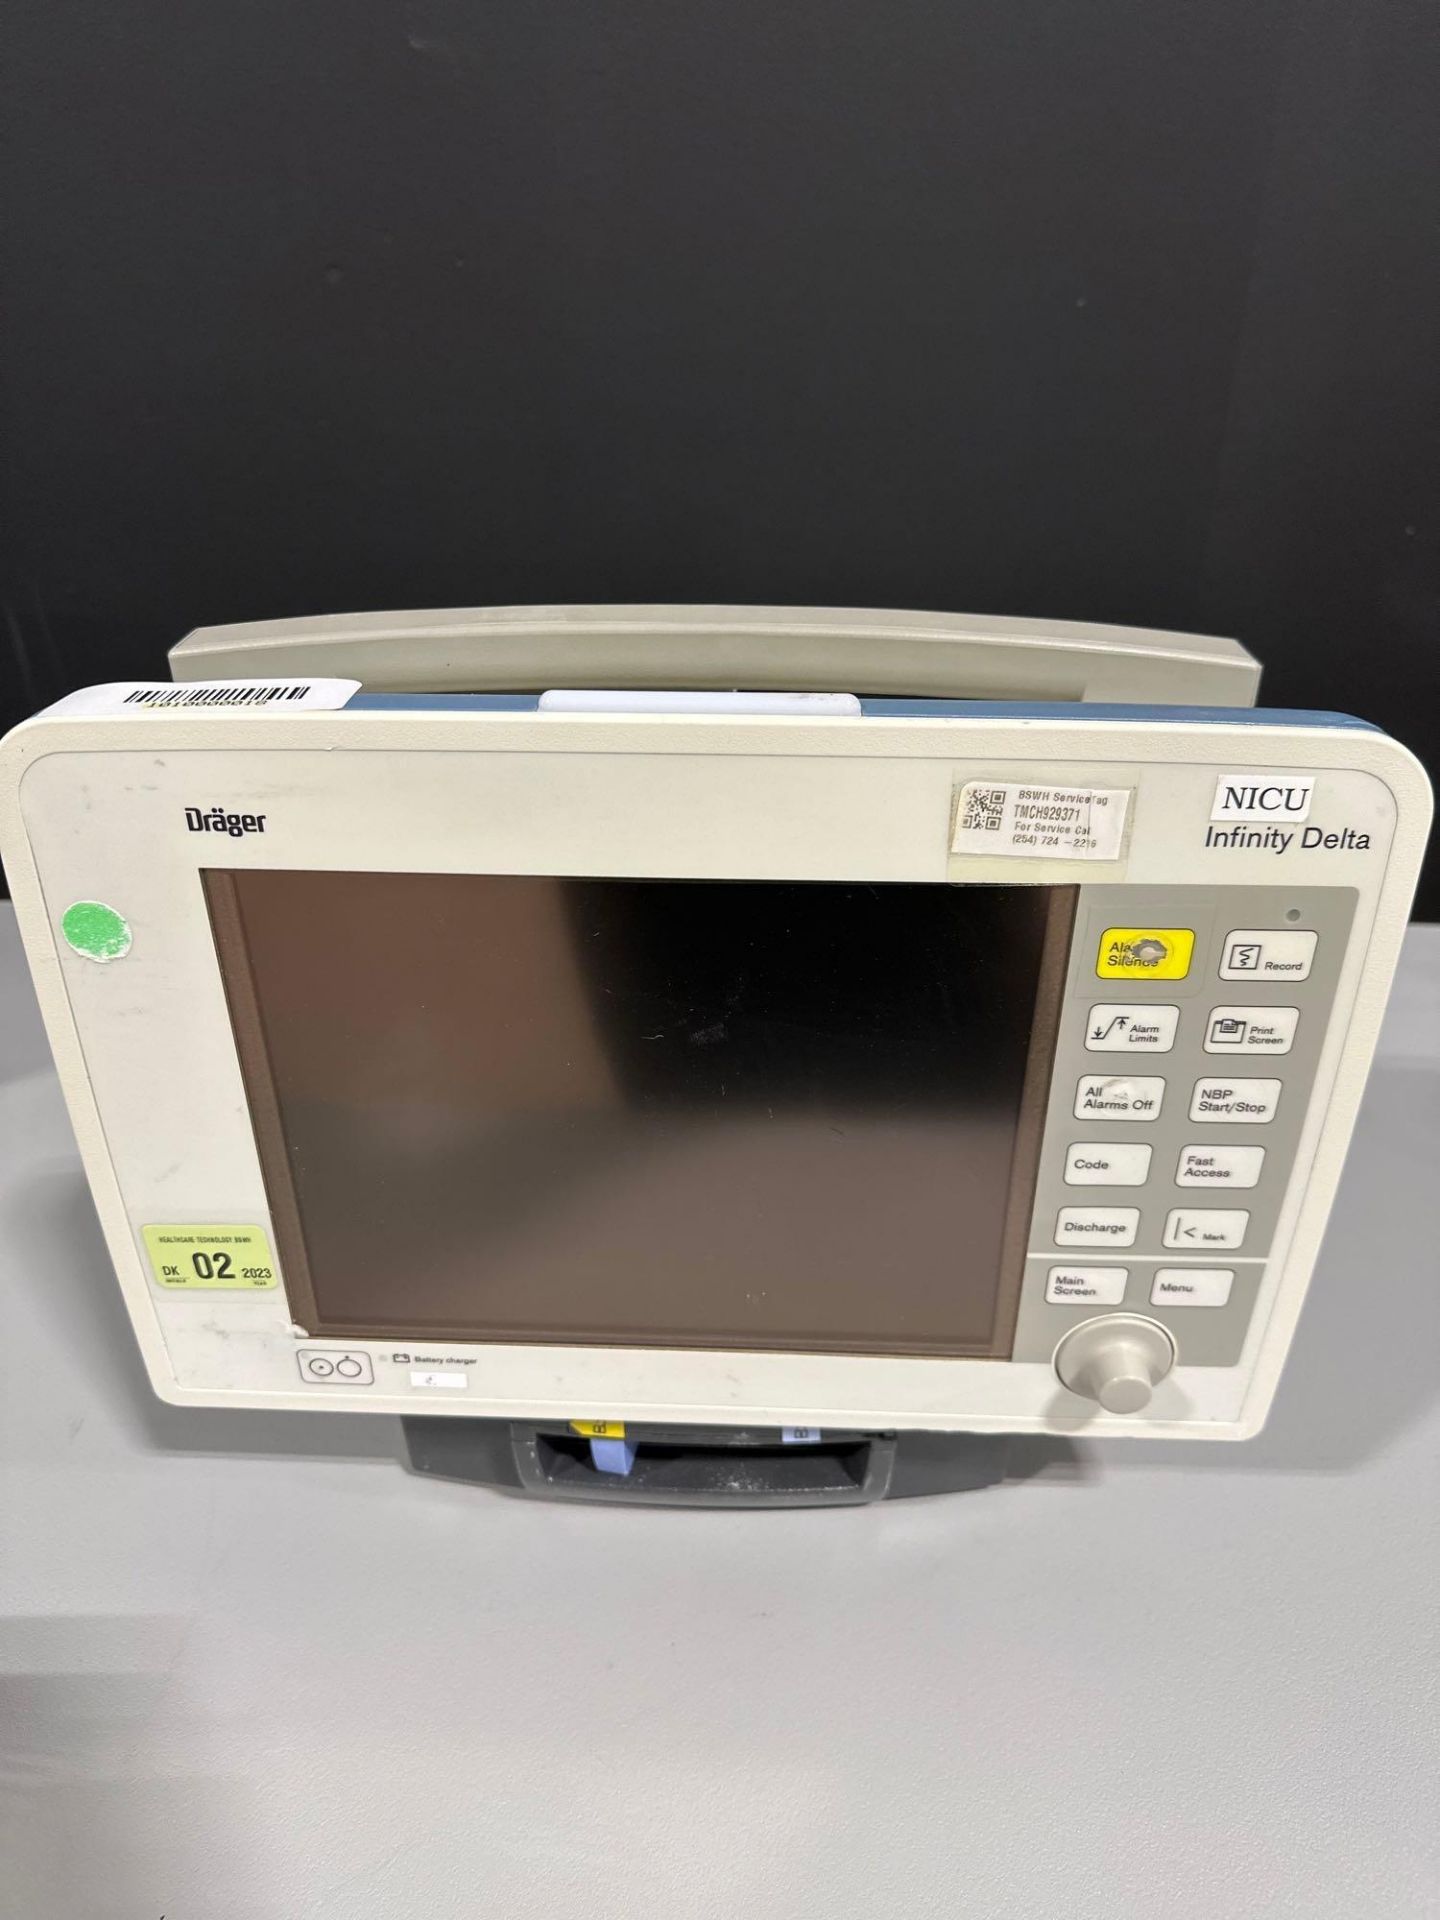 DRAGER INFINITY DELTA PATIENT MONITOR - Image 2 of 6